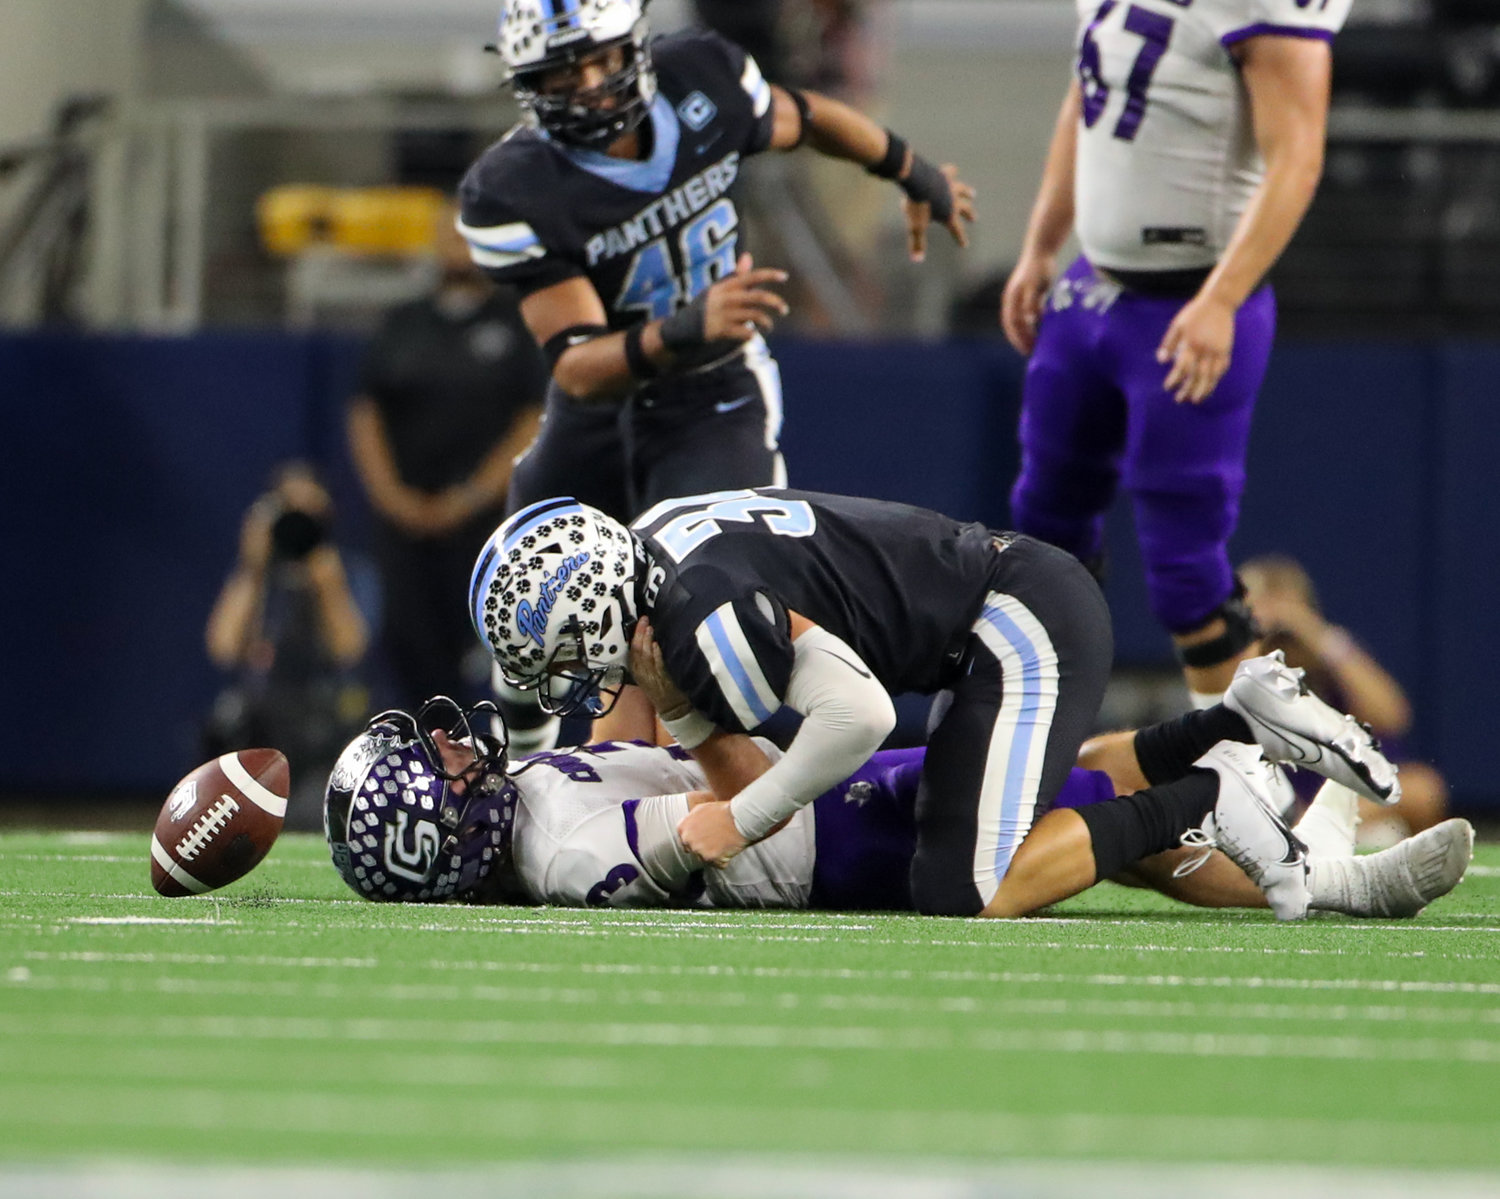 The ball comes loose as Paetow Panthers linebacker Tyler Silves (34) sacks College Station Cougars quarterback Jett Huff (3) during the Class 5A Division I state football championship game between Paetow and College Station on December 17, 2021 in Arlington, Texas.